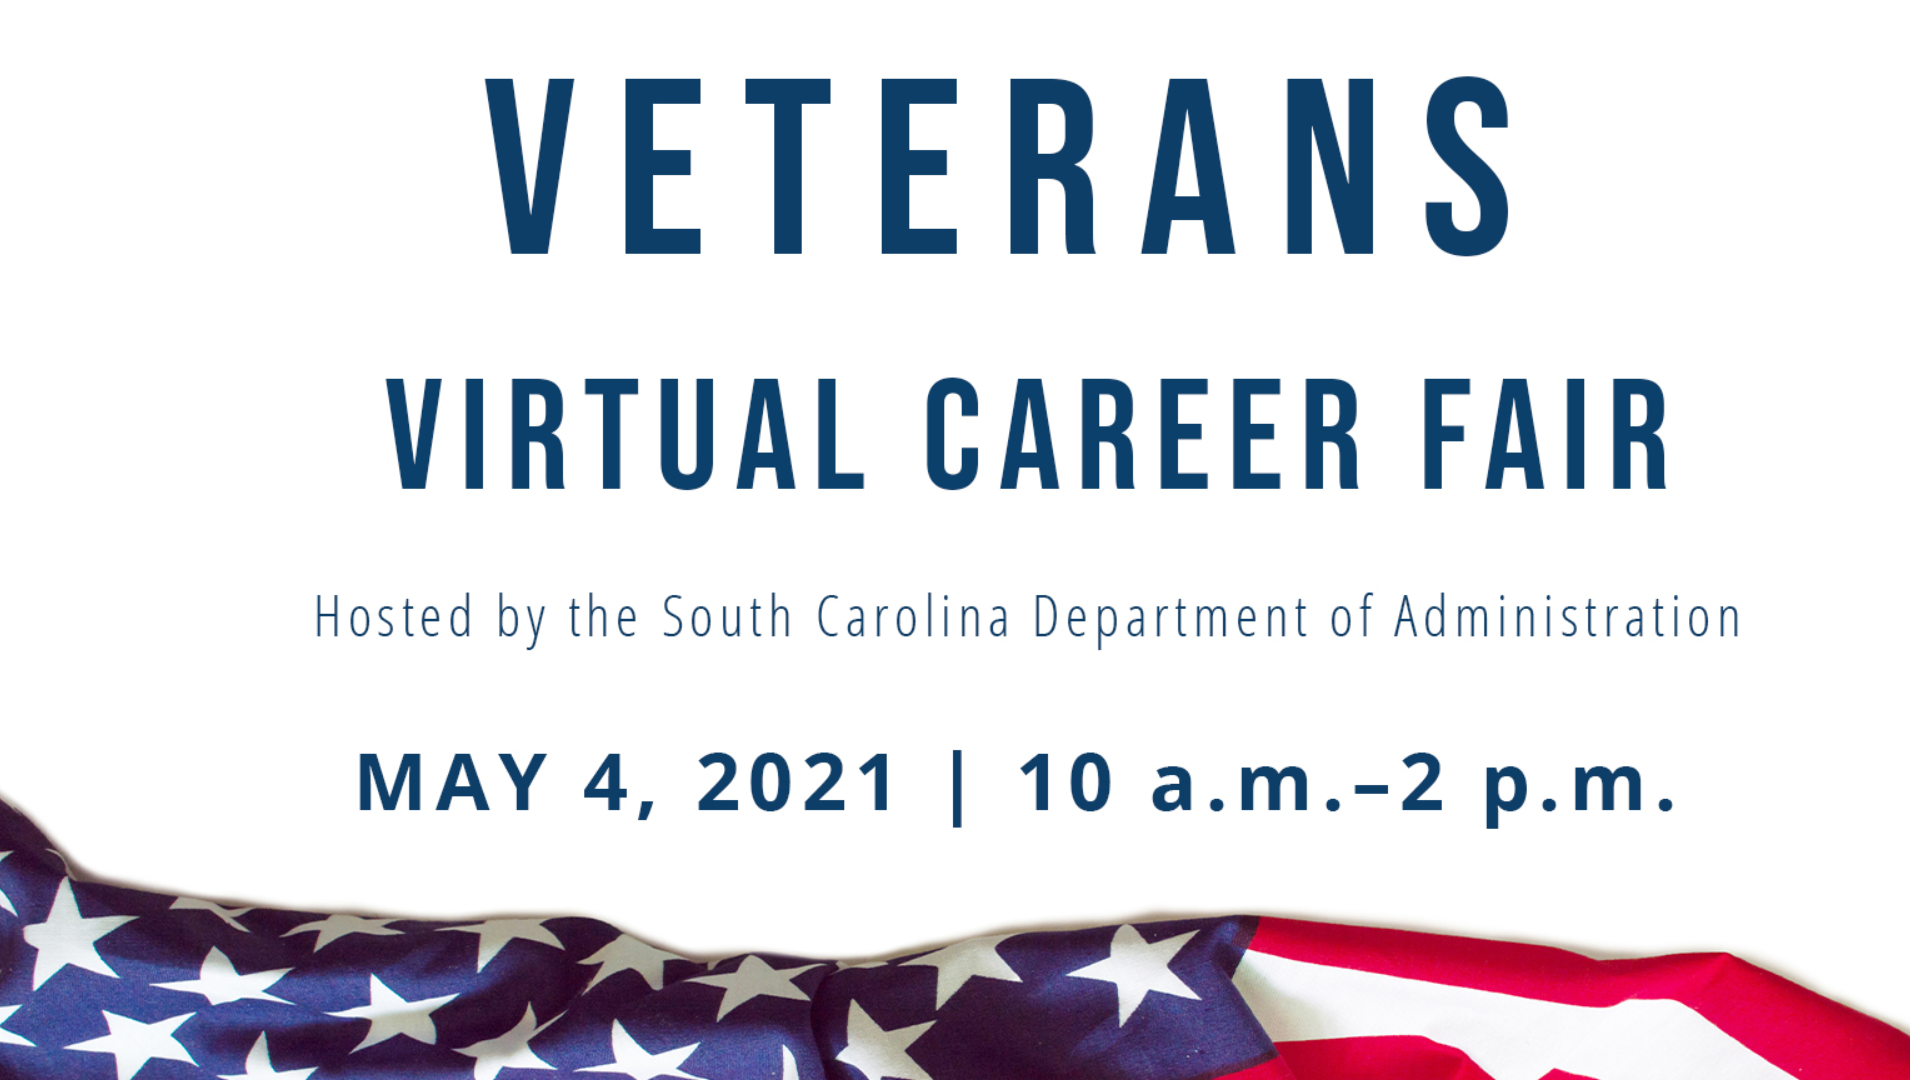 More than 30 state agencies will be represented in the online career fair featuring a wide variety of positions; pre-registration is open now.